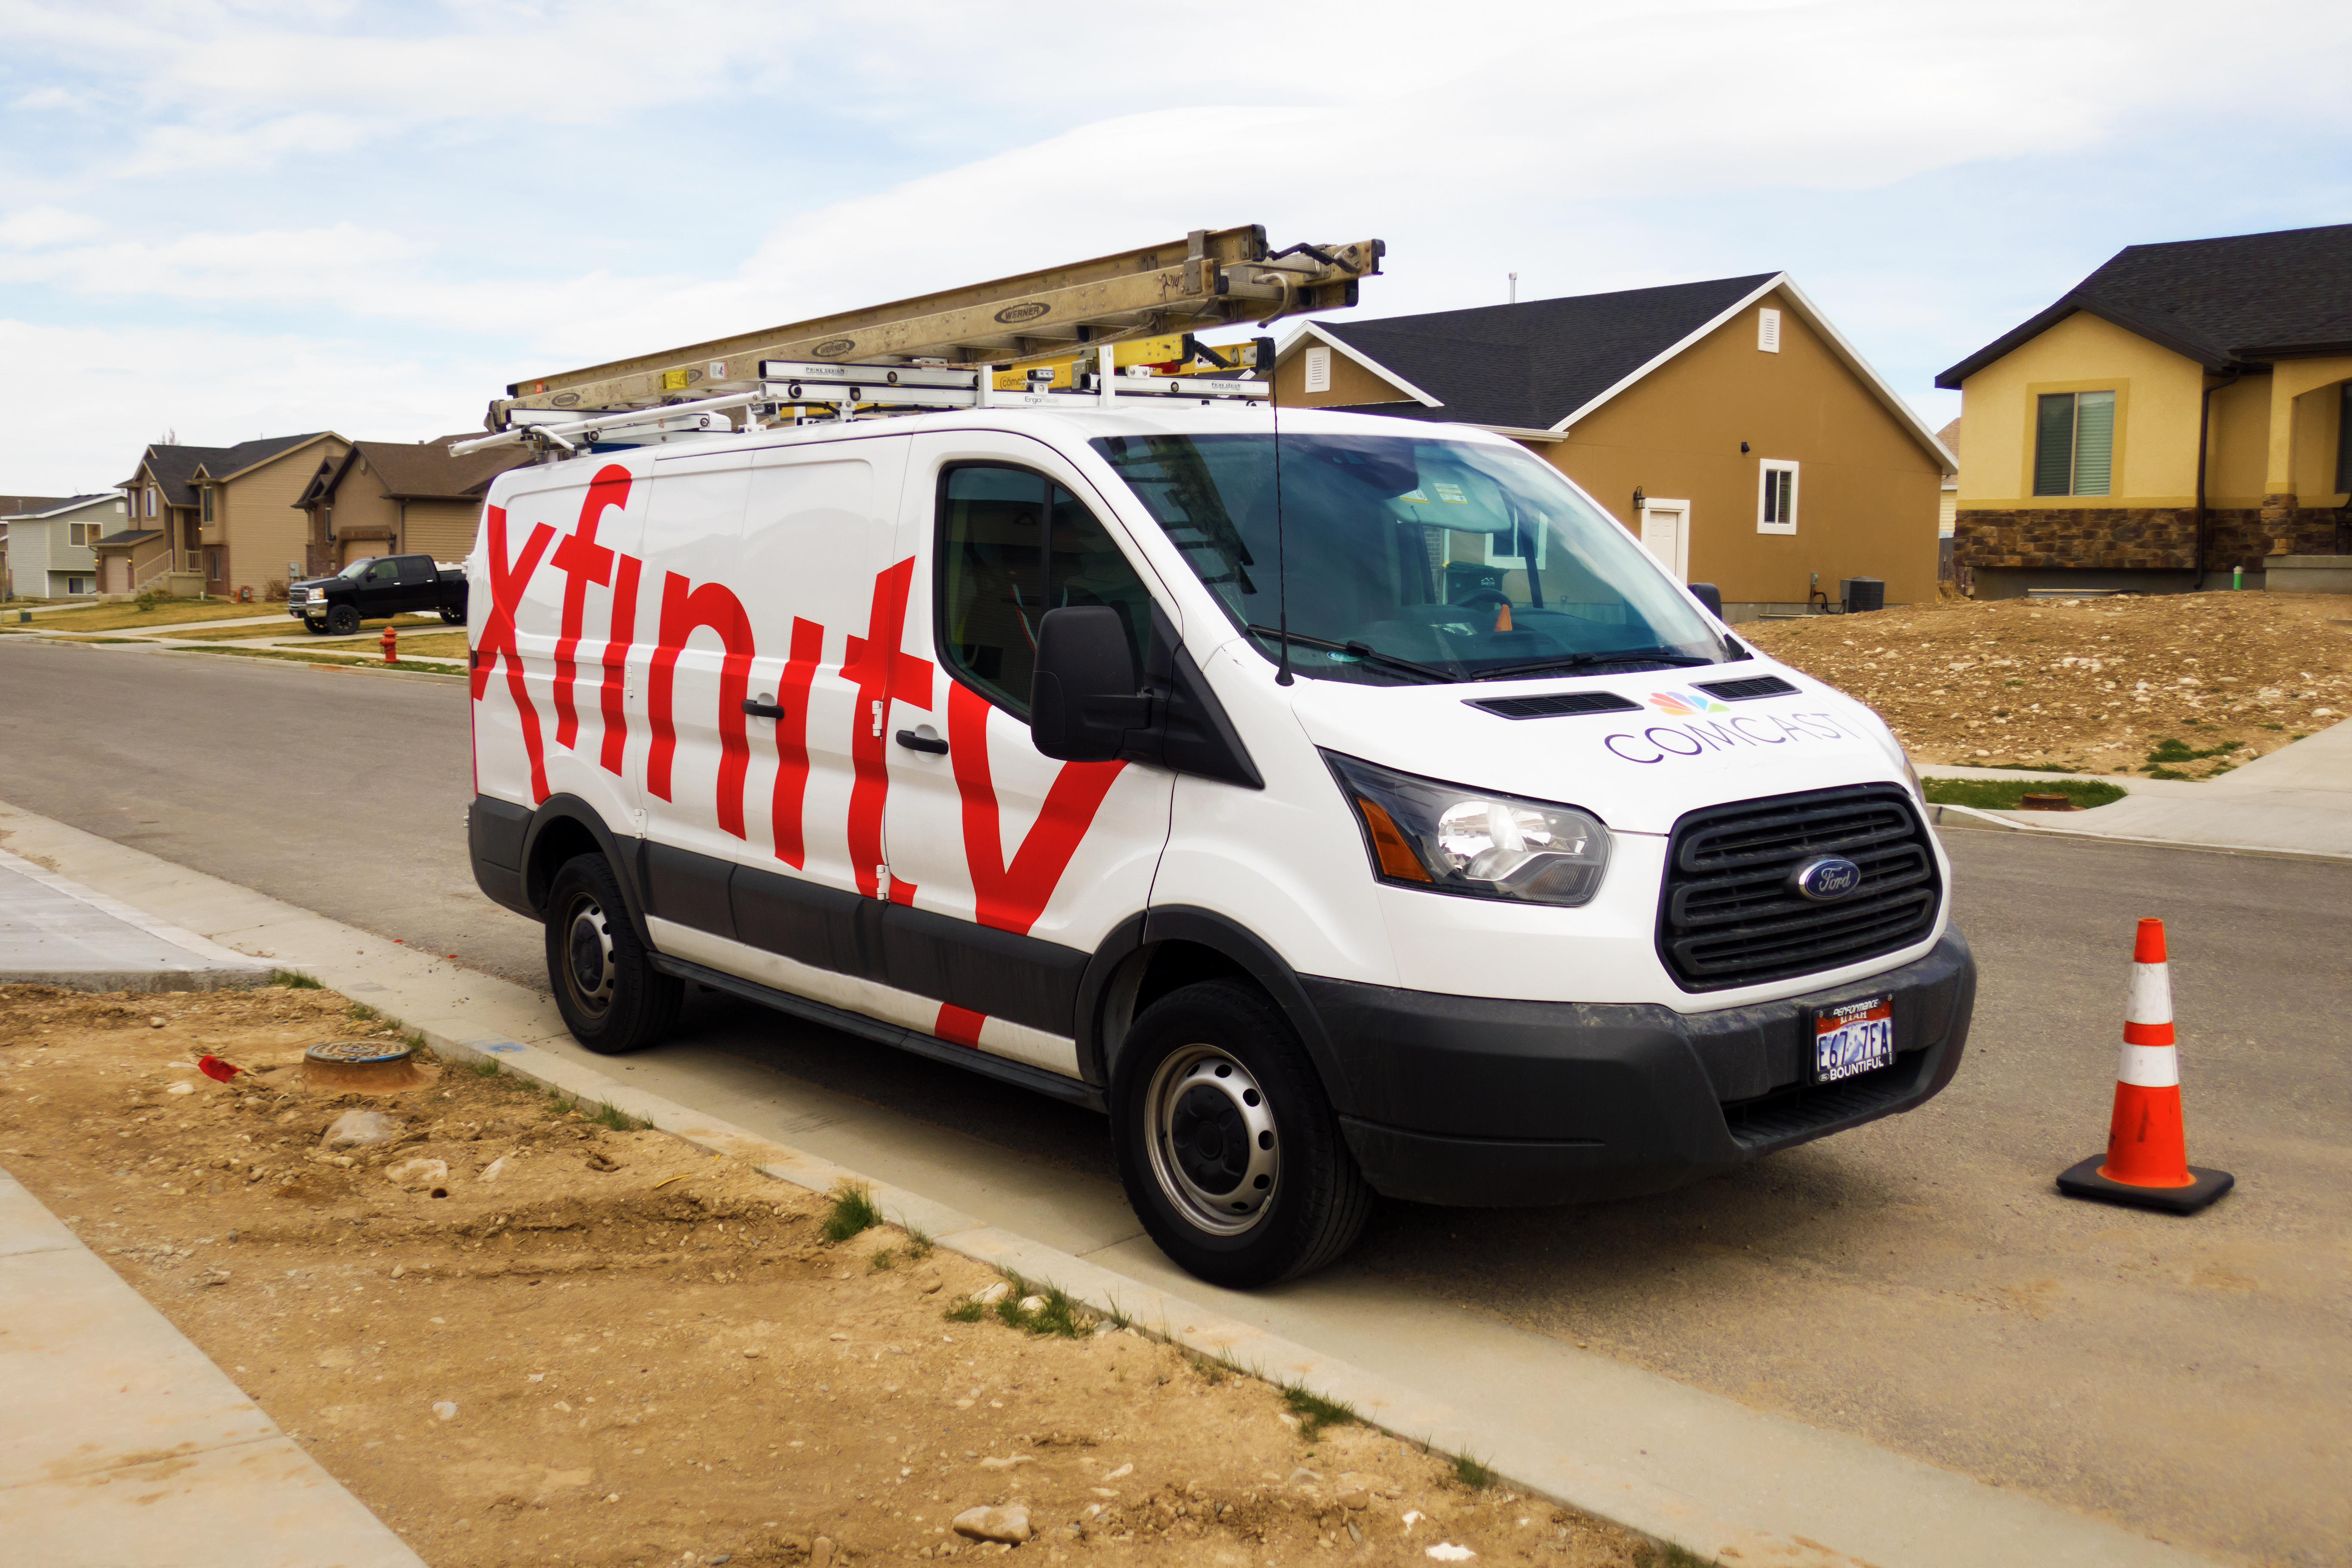 From Dark Reading – Comcast Xfinity Breached via CitrixBleed; 35M Customers Affected